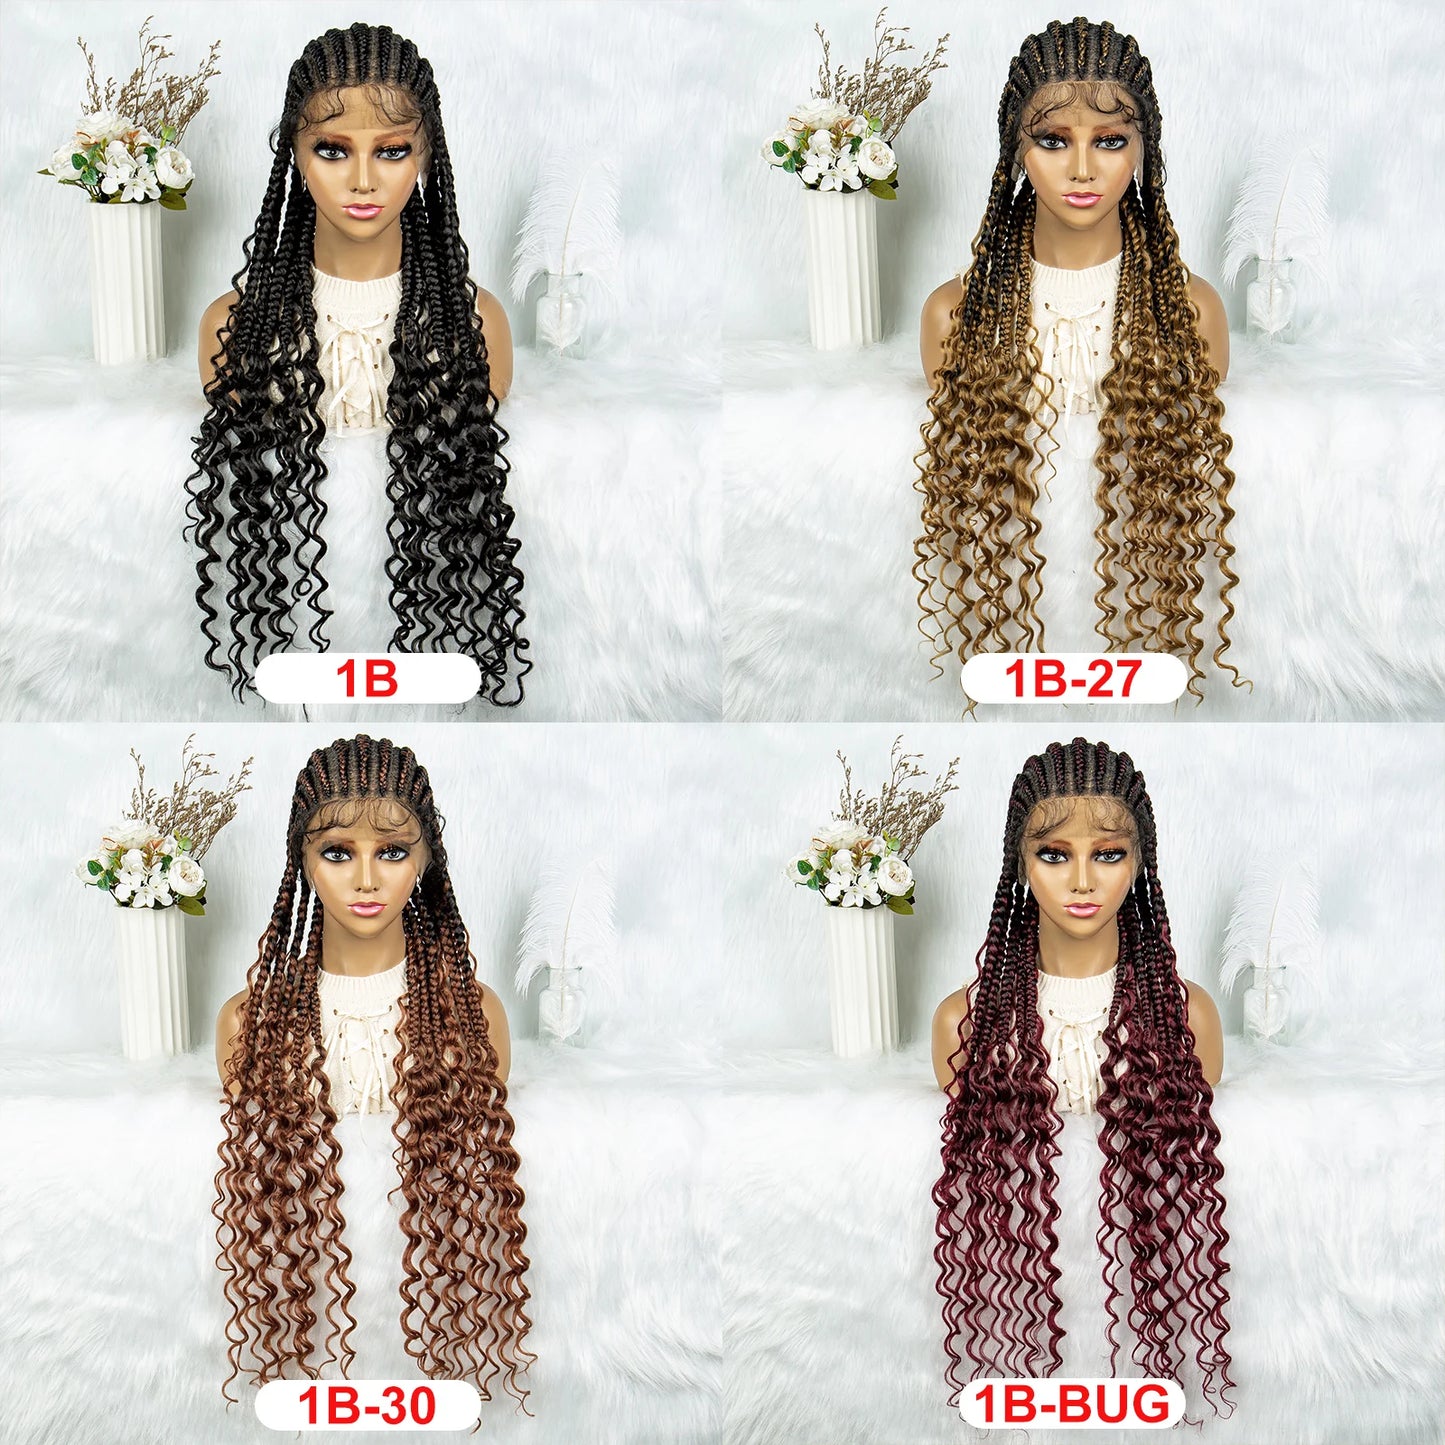 Full Lace Braided Wigs Synthetic Lace Front With Baby Hair ,Water Wavy Ends